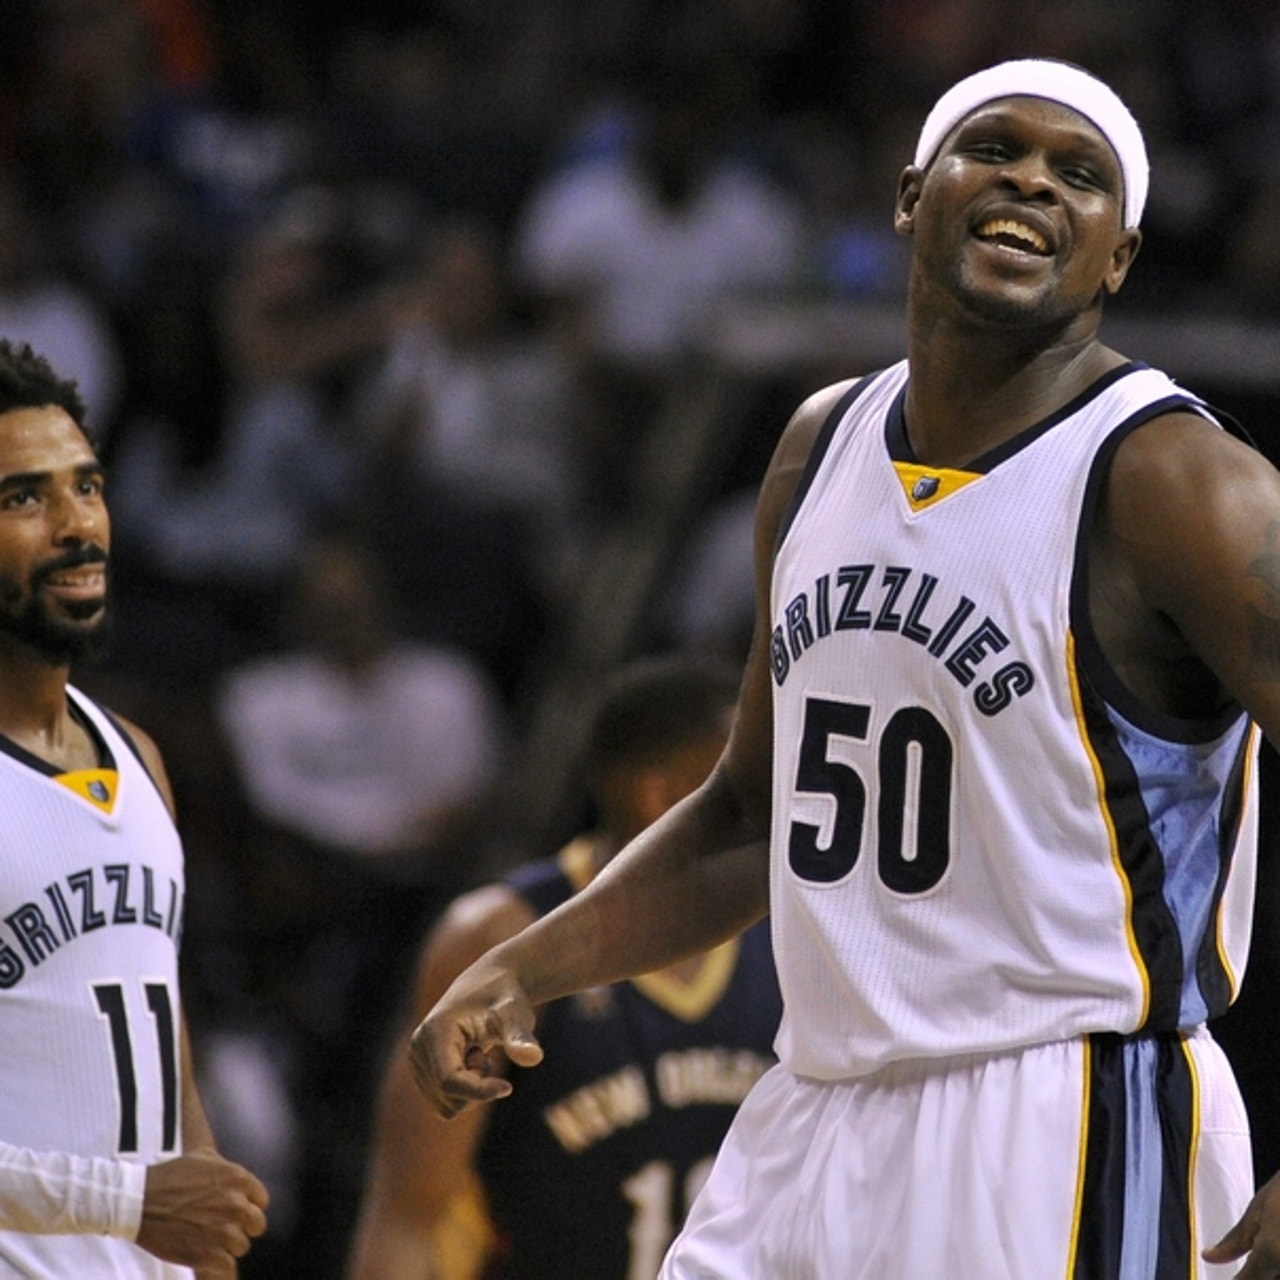 Grizzlies Announce That They Will Retire Zach Randolph's No. 50 Jersey